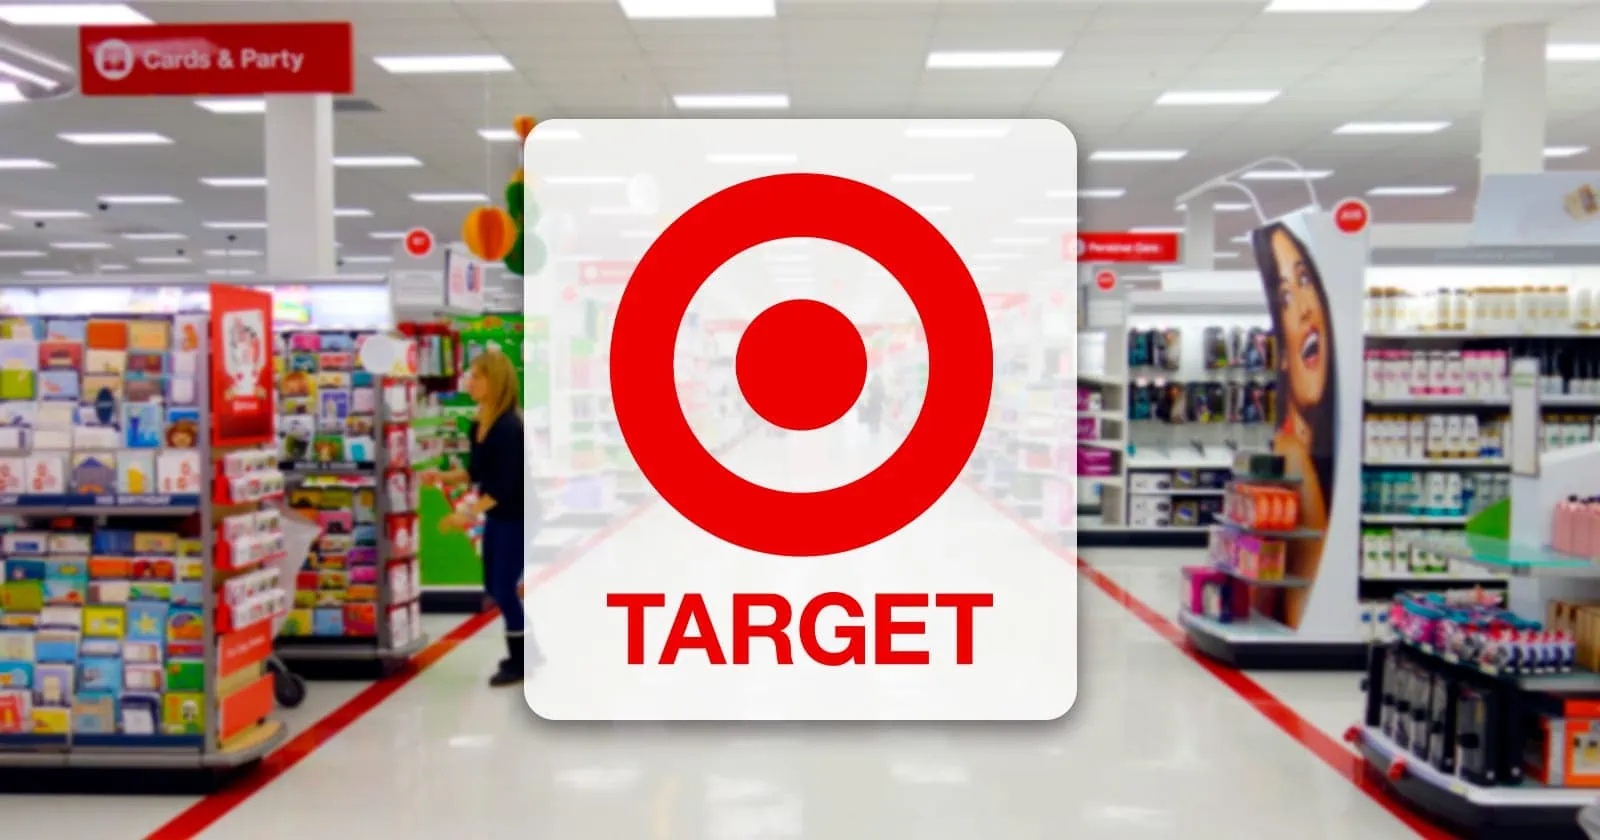 New Target Membership Plan What is the Cost and the Application Date